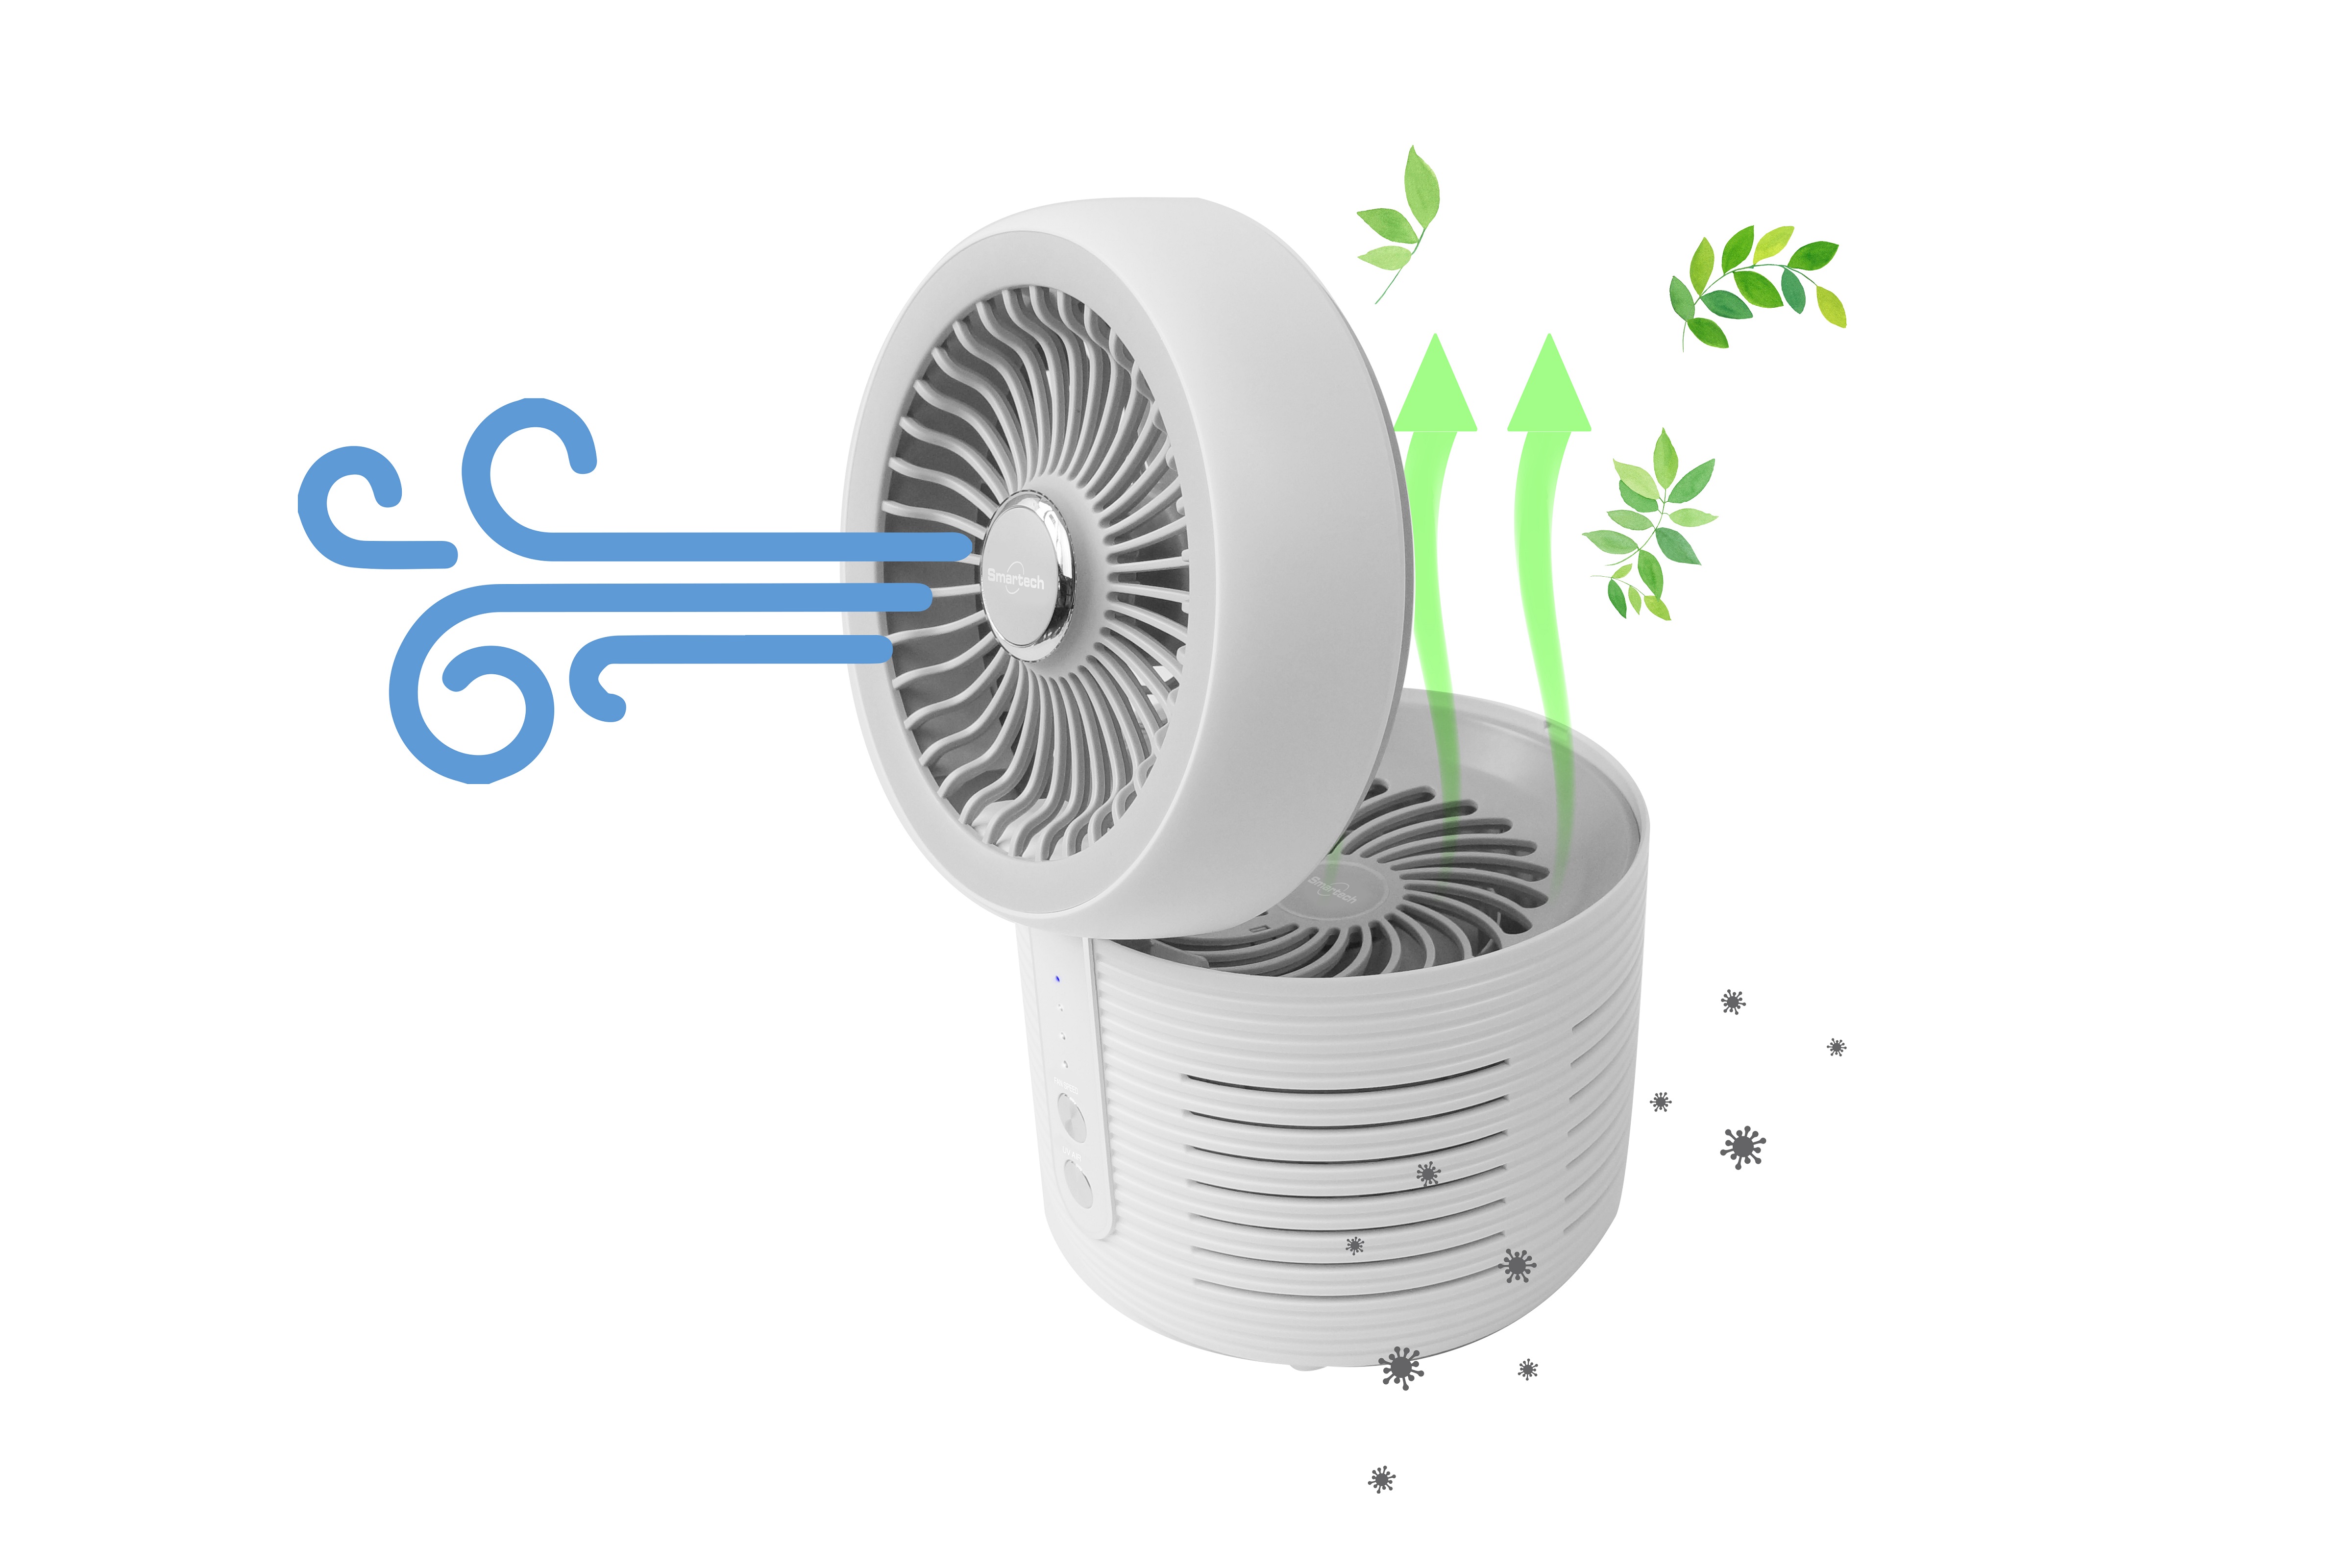 Smartech Round Air 2 in 1 UV HEPA Air Purifier and Circulation Fan (White), , large image number 2